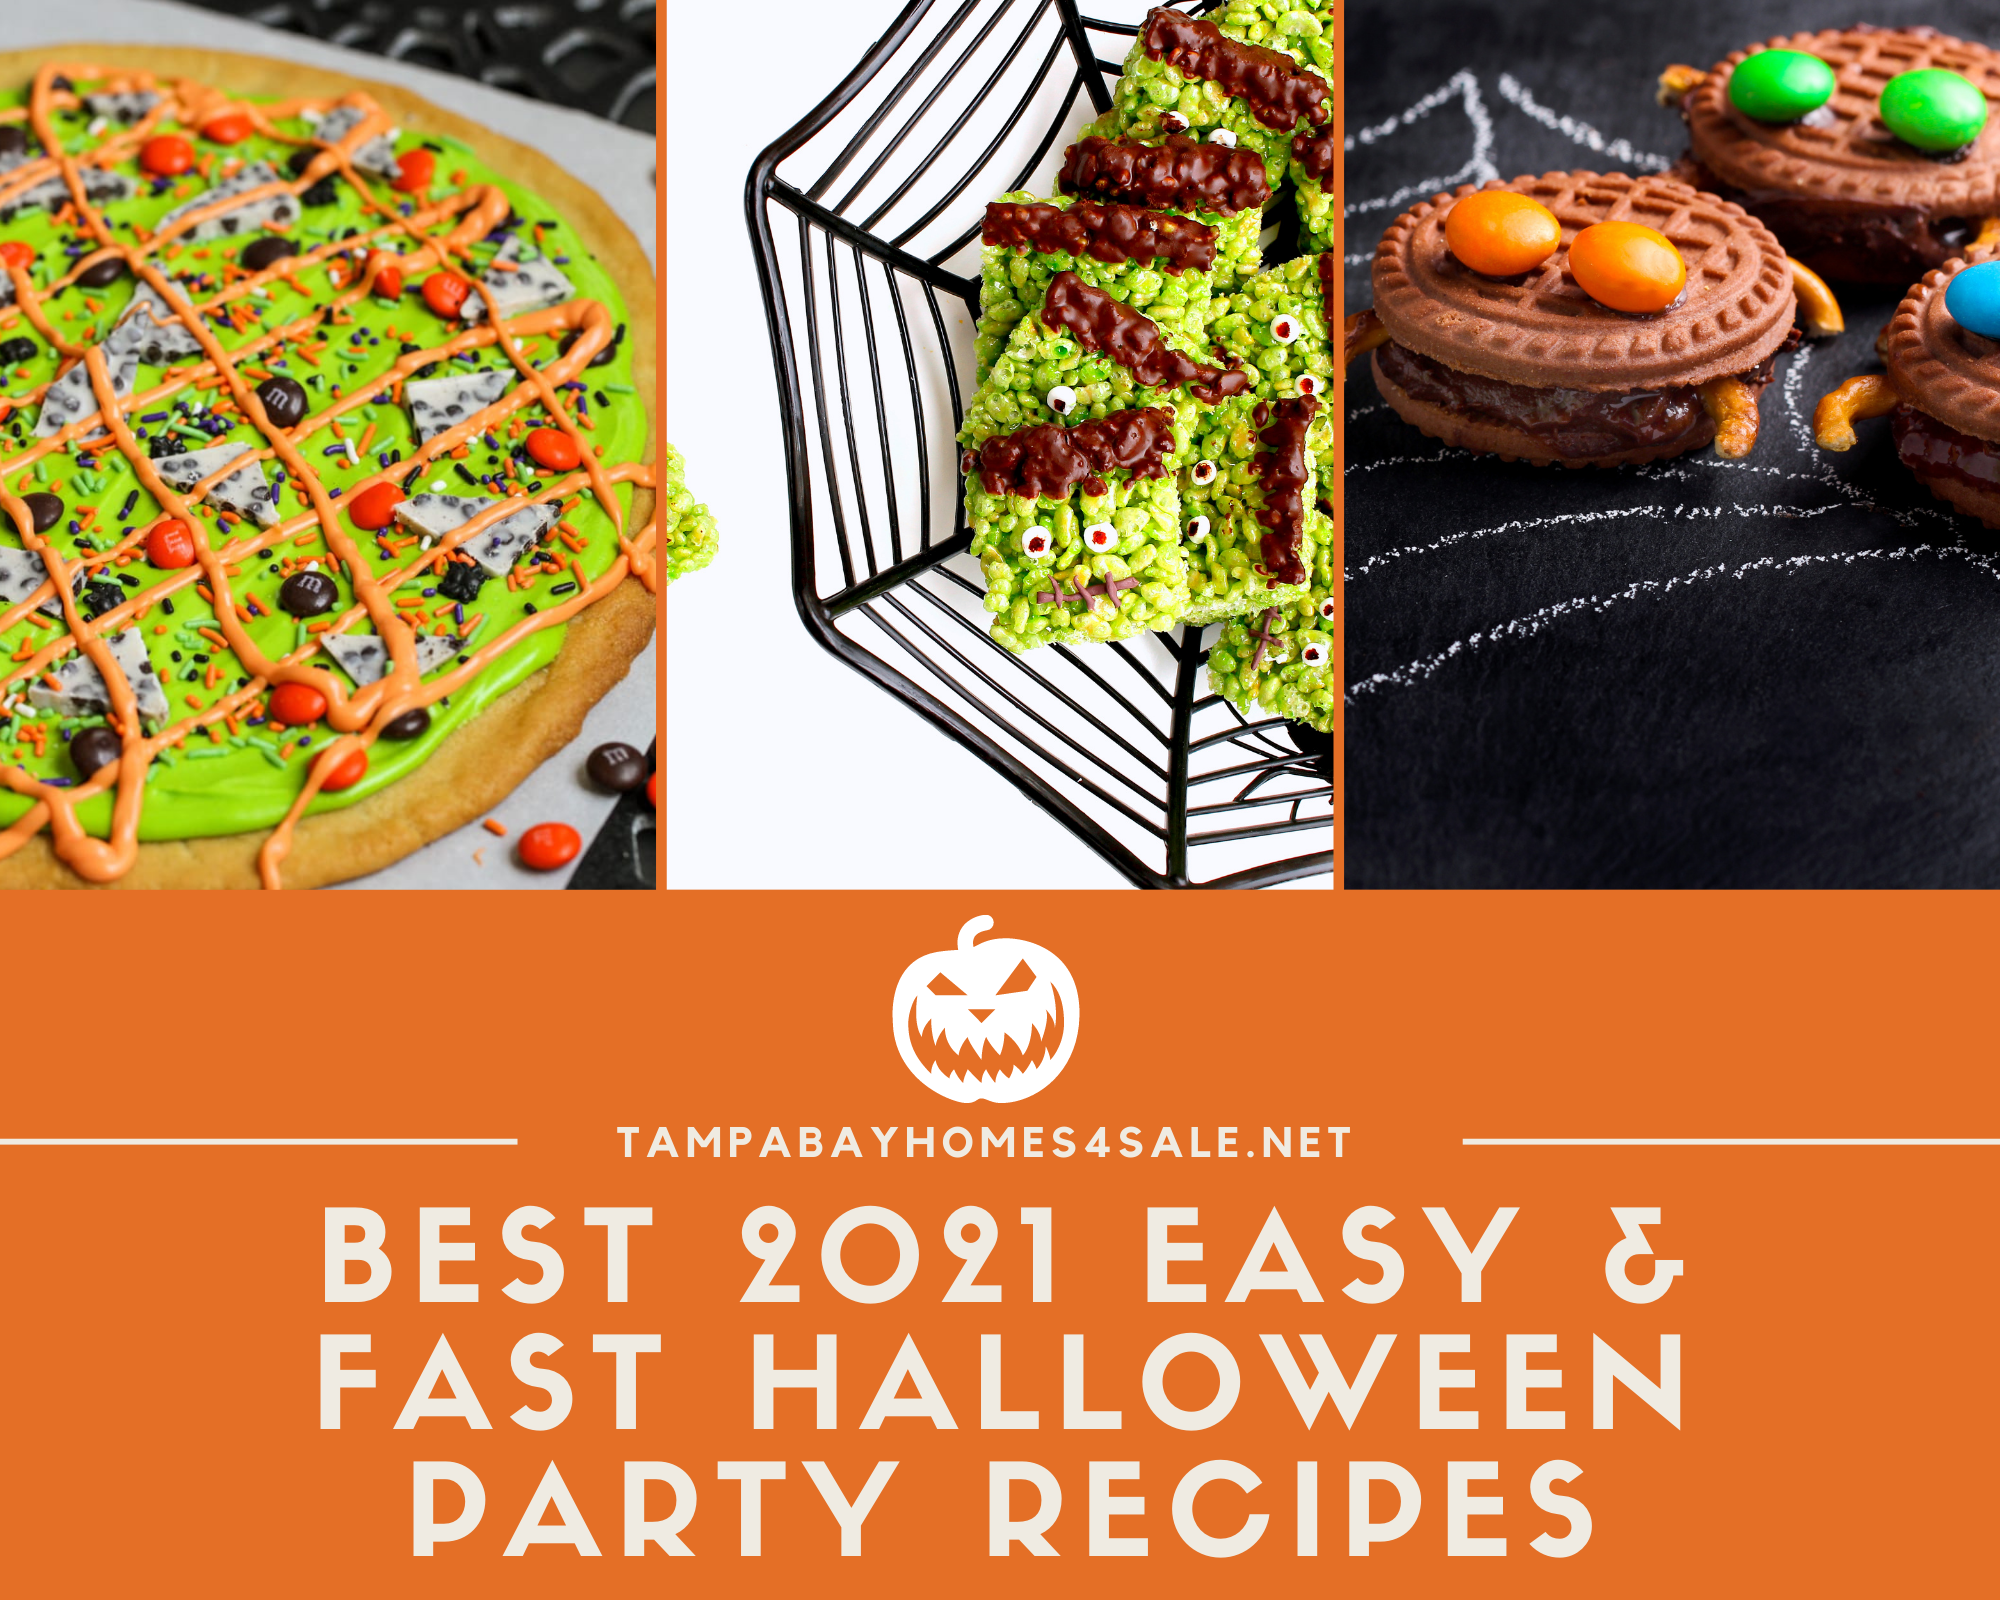 Best 2021 Easy Fast Halloween Party Recipes to Make When Youre in a Pinch